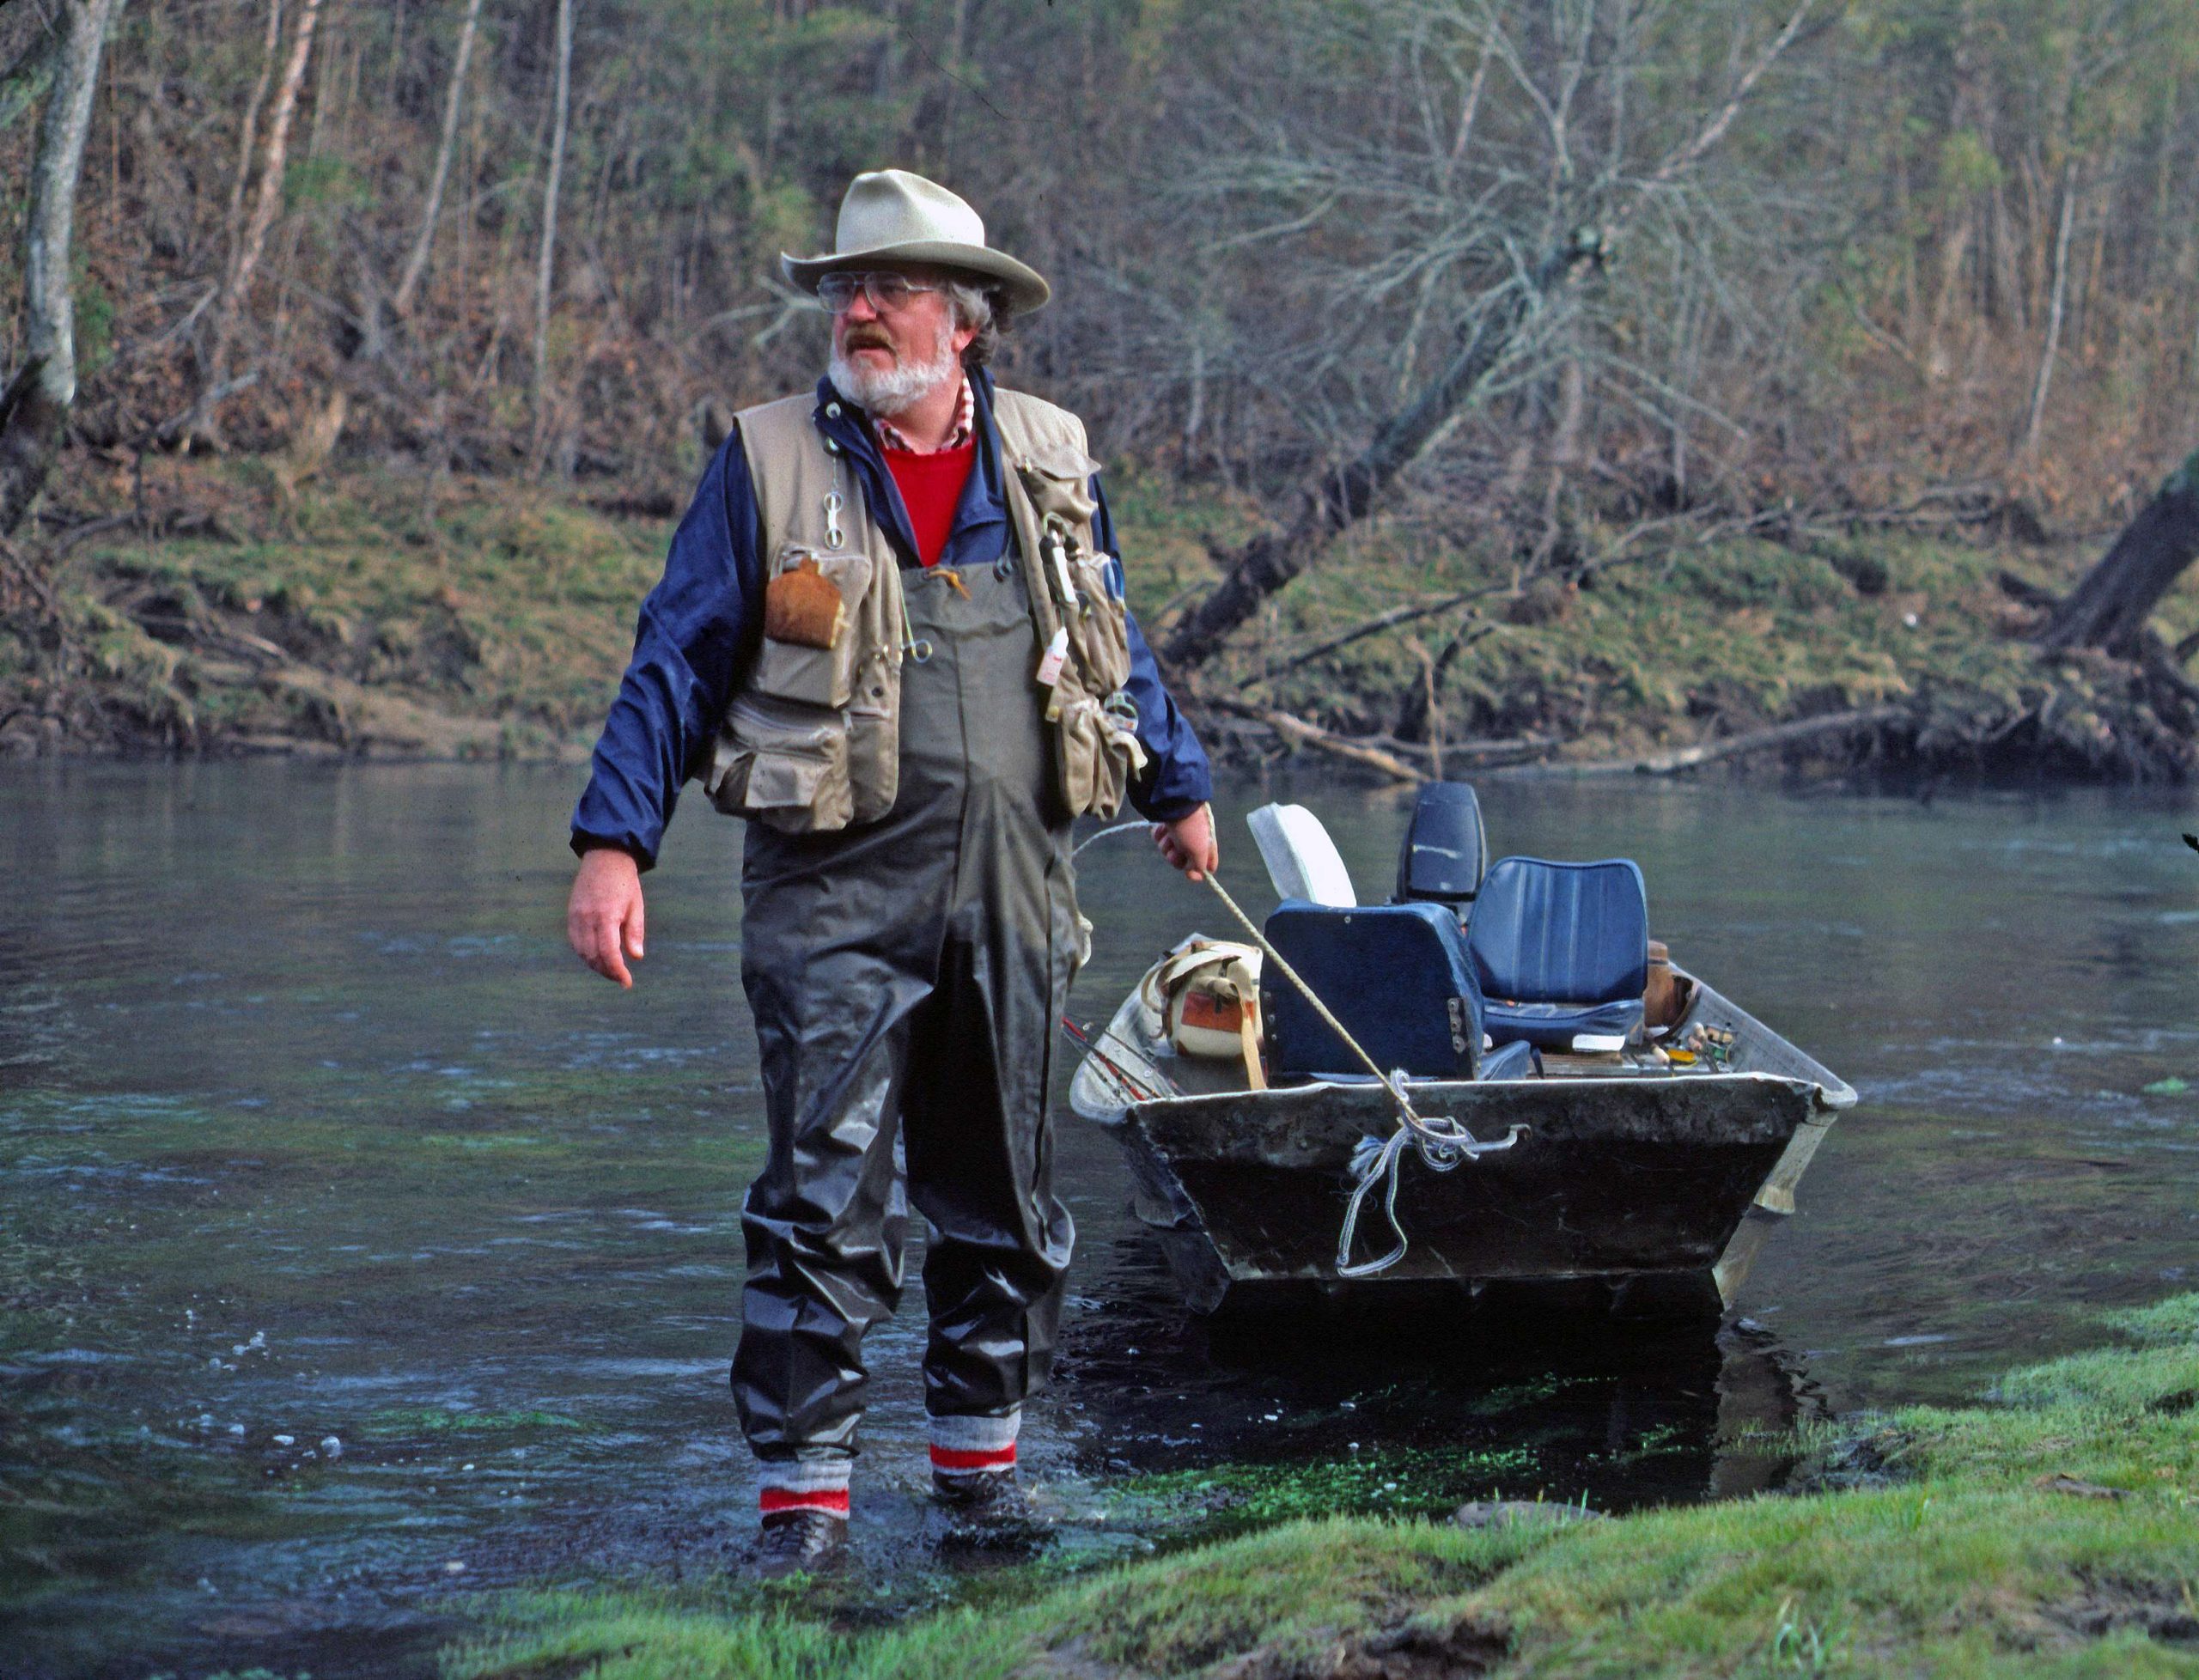 Cliff Shelby, who brought the characters of <em>Bassmaster</em> Magazineâs Harry âNâ Charlie humor feature to life through his artwork, has died. Shelby lived with his wife, Karen, in Maumelle, Ark. Karen was by his side when he died Saturday, Jan. 21. He was 75 years old.
<p>
A talented artist who could wield a paint brush as well as he could a fly rod or flippinâ stick, Shelby was an icon in outdoors journalism and very active in outdoor media organizations.
<p>
Some of his artwork is showcased in this photo gallery. <a href=http://www.bassmaster.com/news/harry-n-charlie-artist-cliff-shelby-dies-75 target=